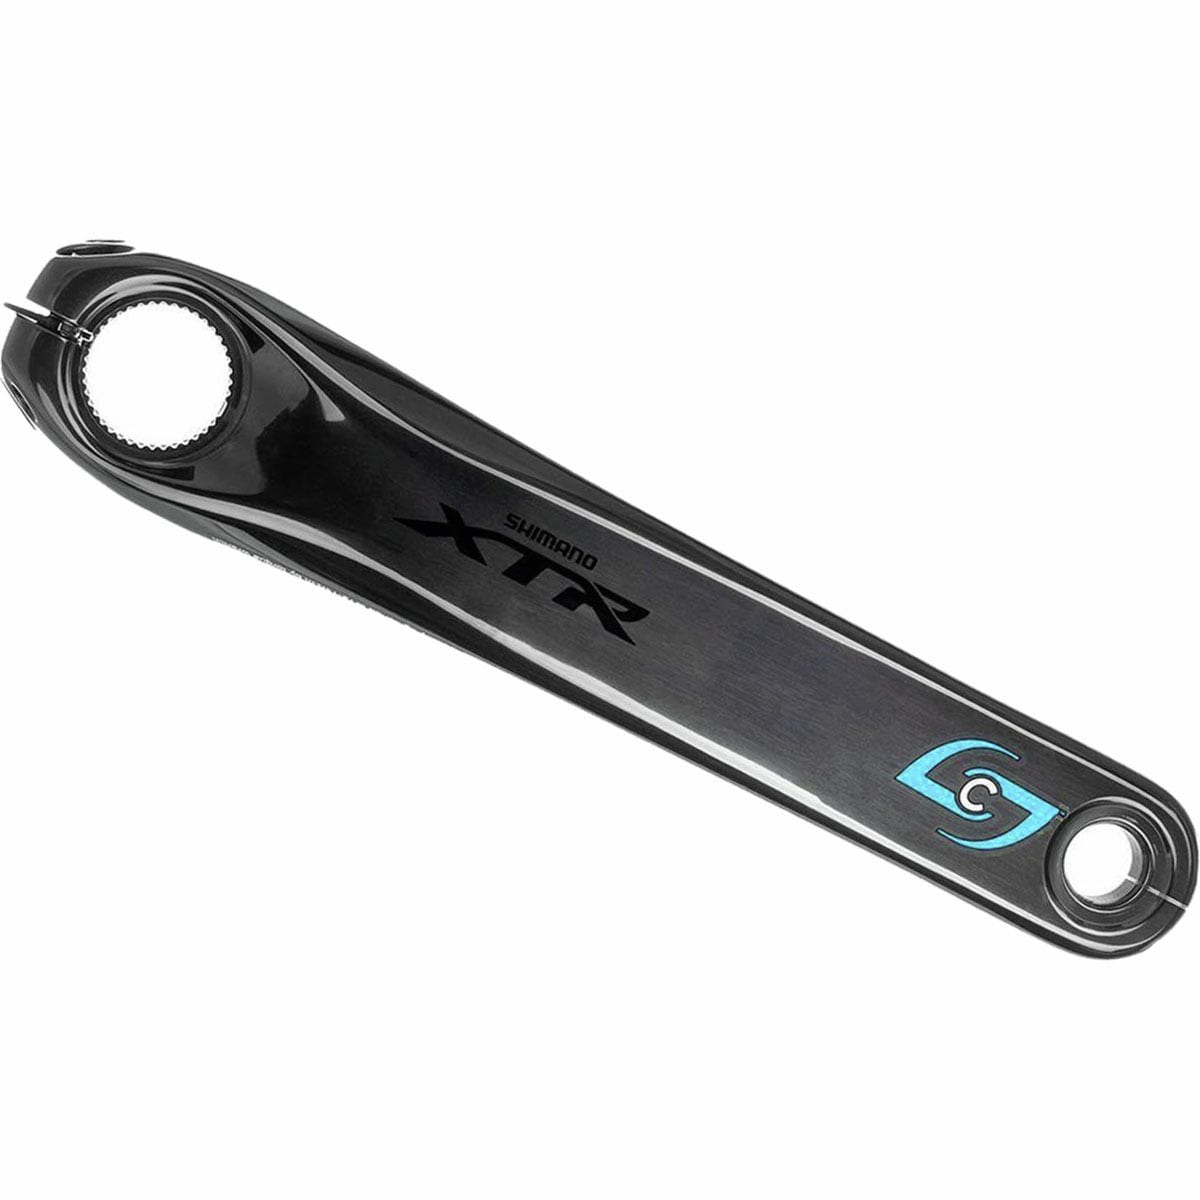 Stages Cycling Shimano XTR M9020 Trail L Gen 3 Power Meter Crank Arm